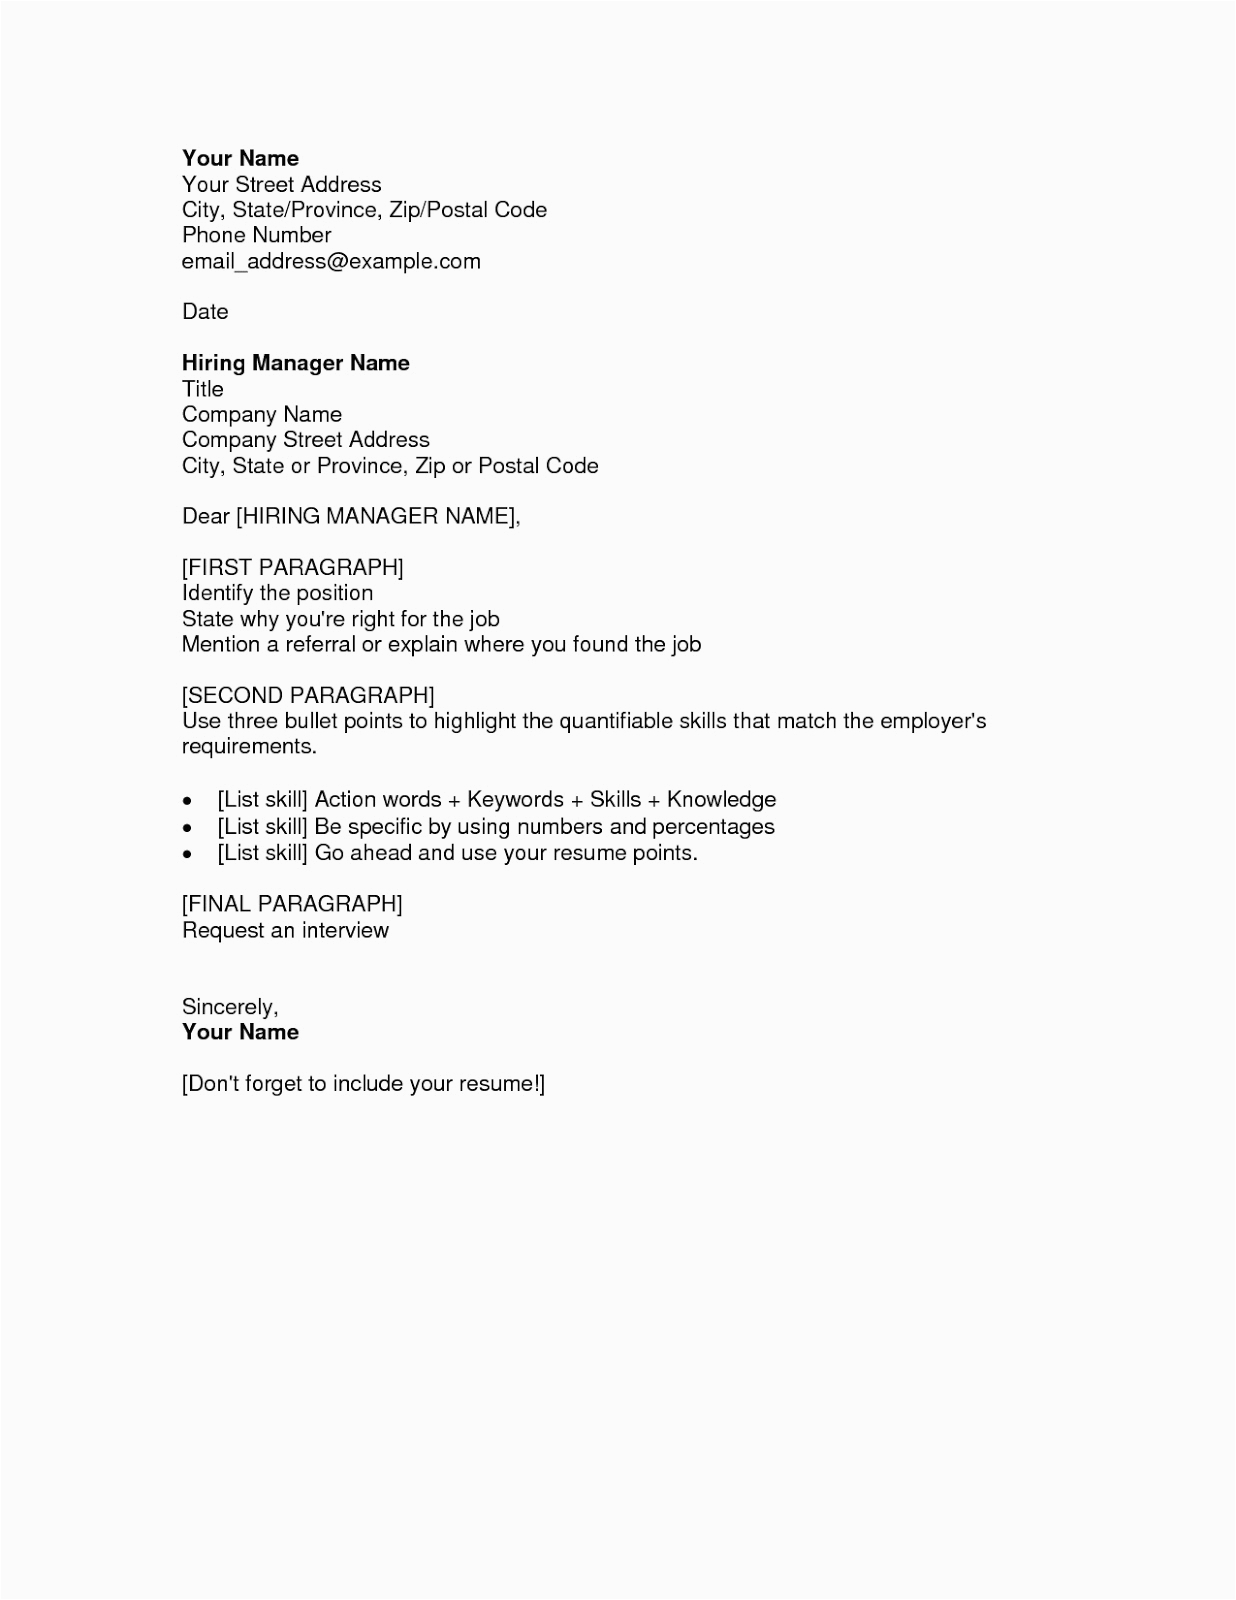 Free Sample Of A Resume Cover Letter Free Cover Letter Samples for Resumes